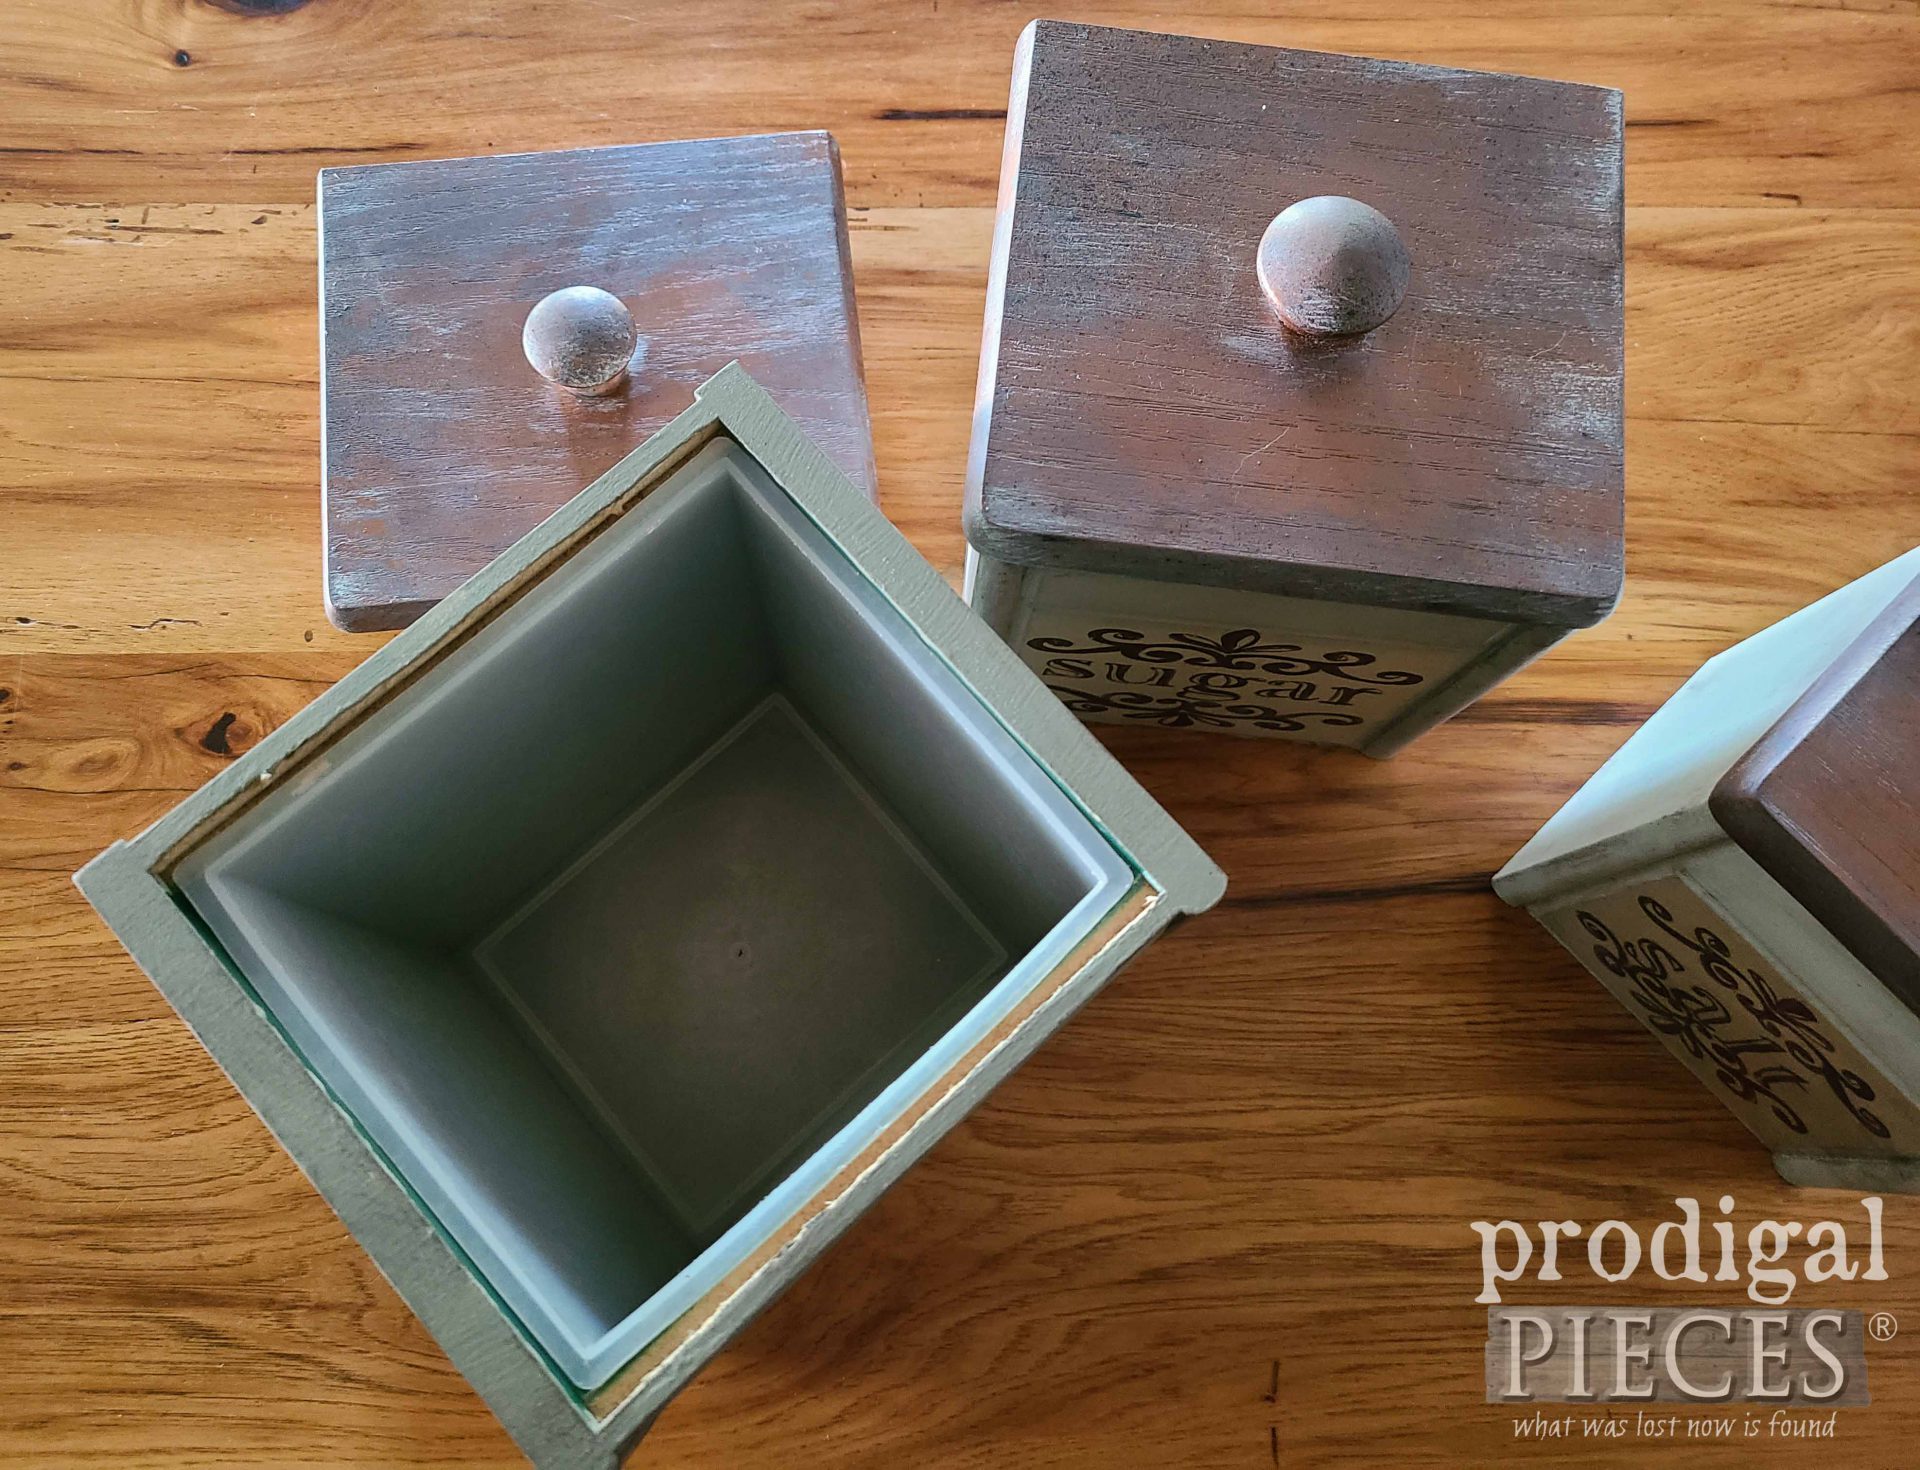 Inside Thrifted Kitchen Canisters for Farmhouse Kitchen Storage by Larissa of Prodigal Pieces | prodigalpieces.com #prodigalpieces #farmhouse #kitchen #home